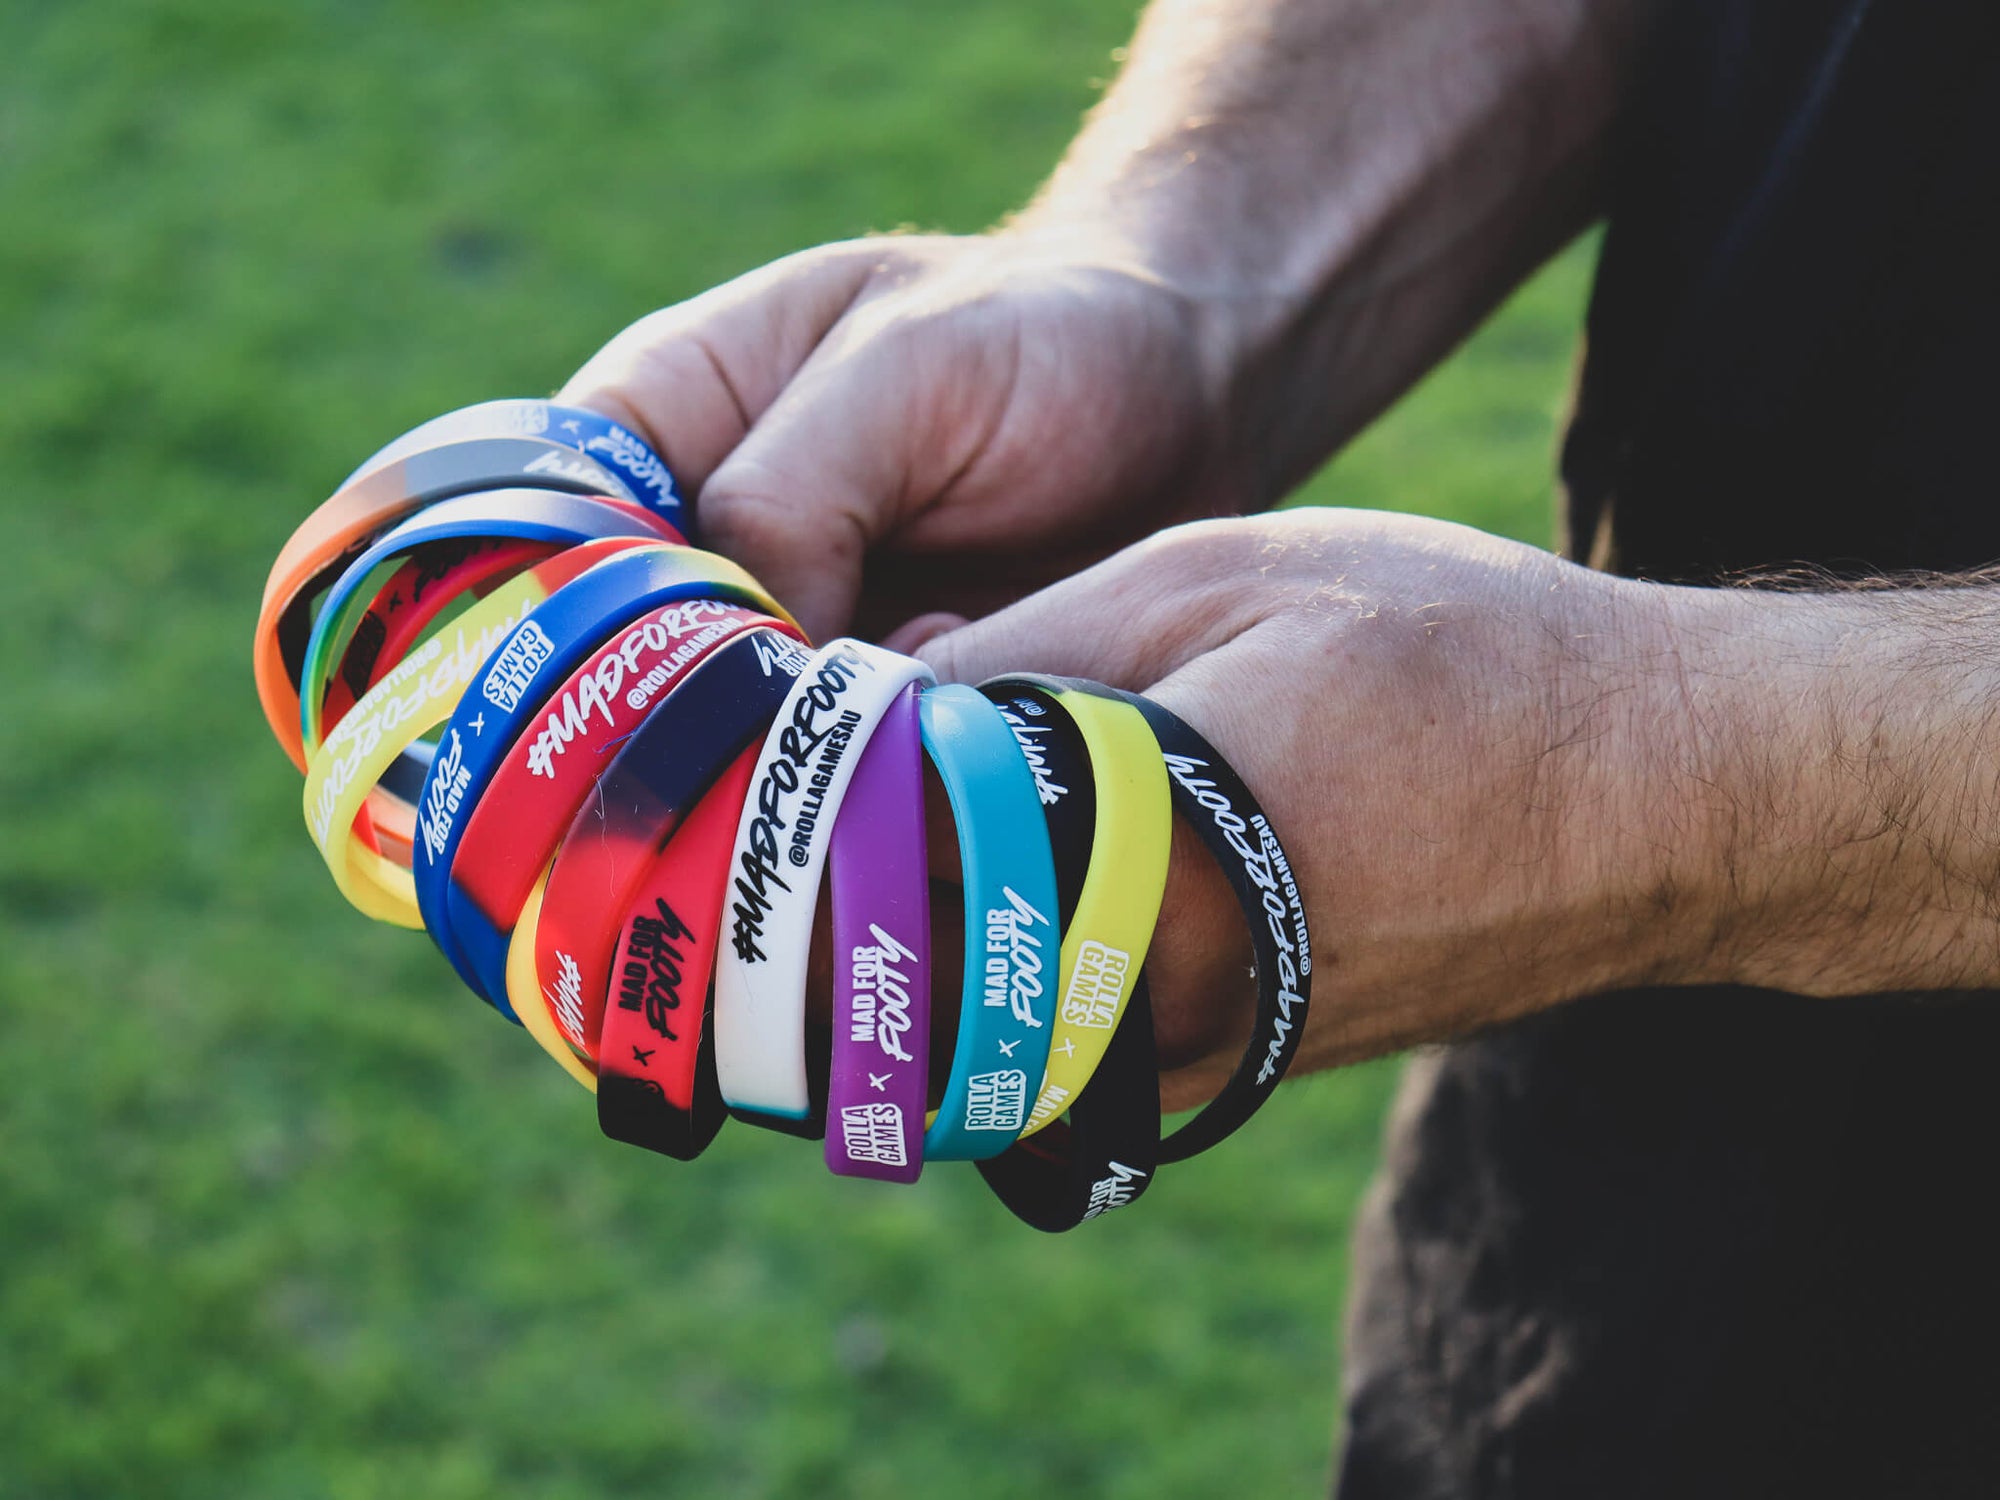 Holding a handful of colourful AFL football club wristbands.